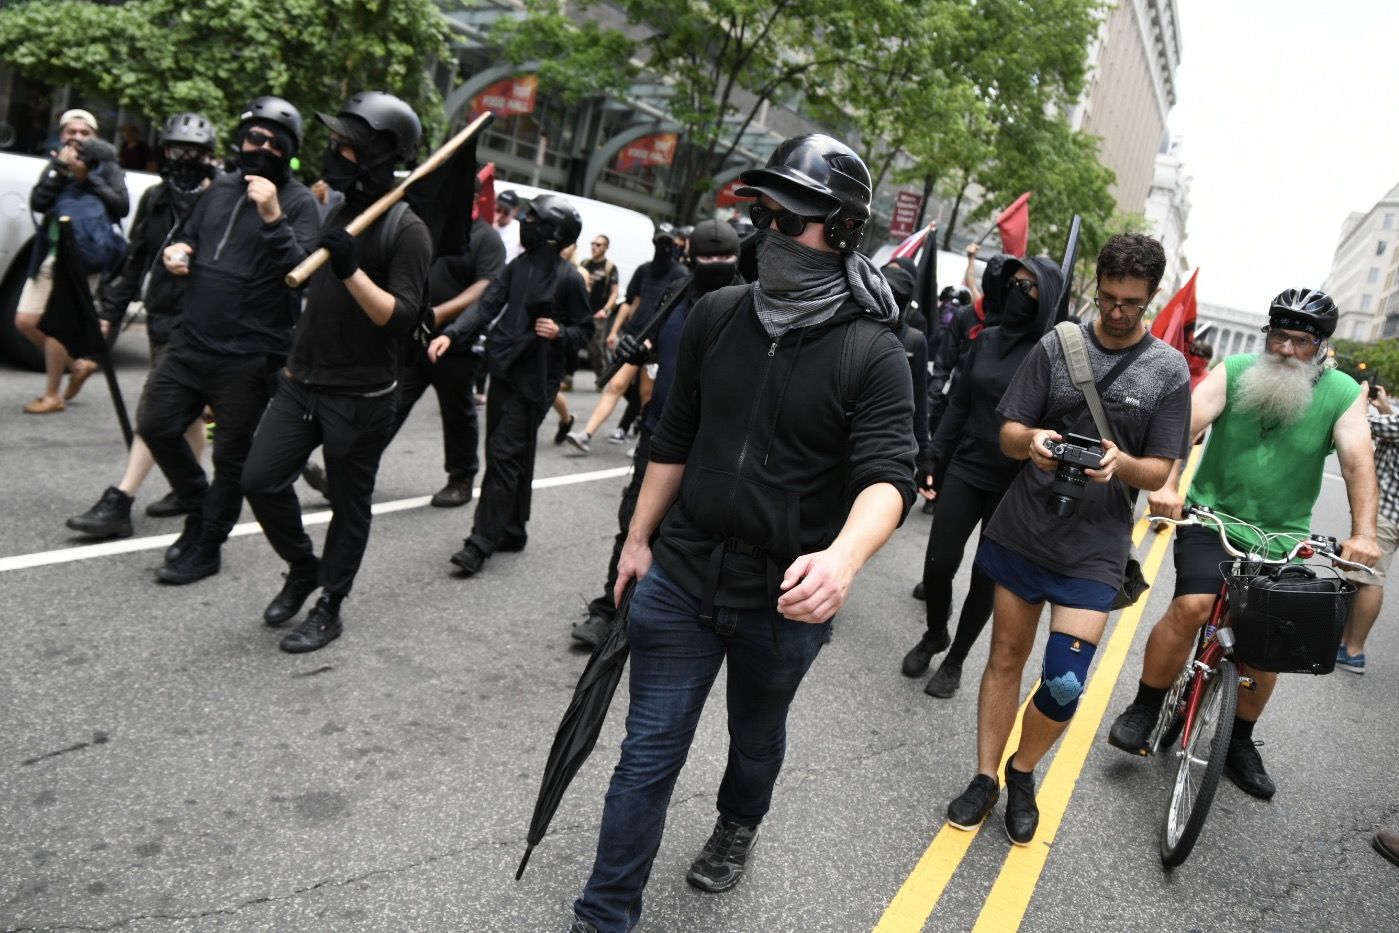 Far-left antifa protesters march down Washington, D.C.’s F Street on July 6, 2019, in an attempt to disrupt a far-right rally in Freedom Plaza. Trump supporters and anti-fascist organizers held dueling rallies across the street from each other, leading to high tensions as D.C. and U.S. Park Police largely held the peace. (WTOP/Alejandro Alvarez)